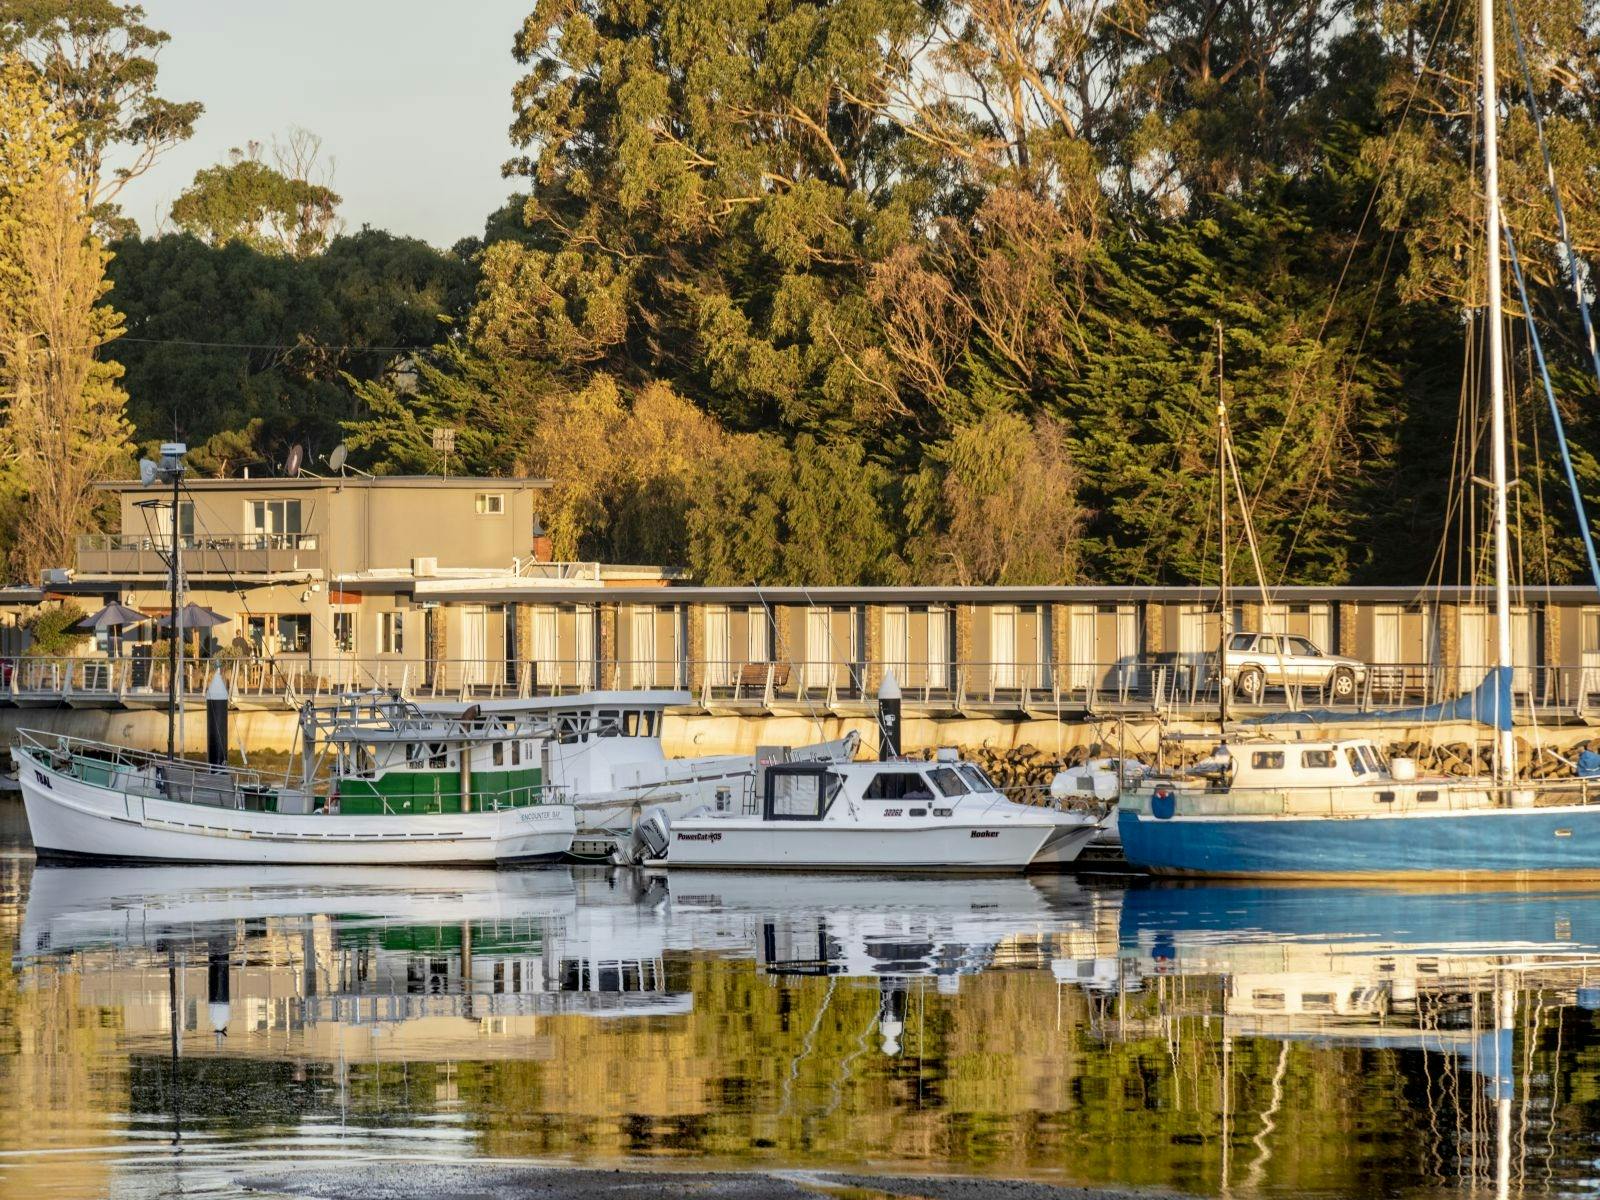 Boats moored on river in foreground with motel in background with large gum trees behind motel